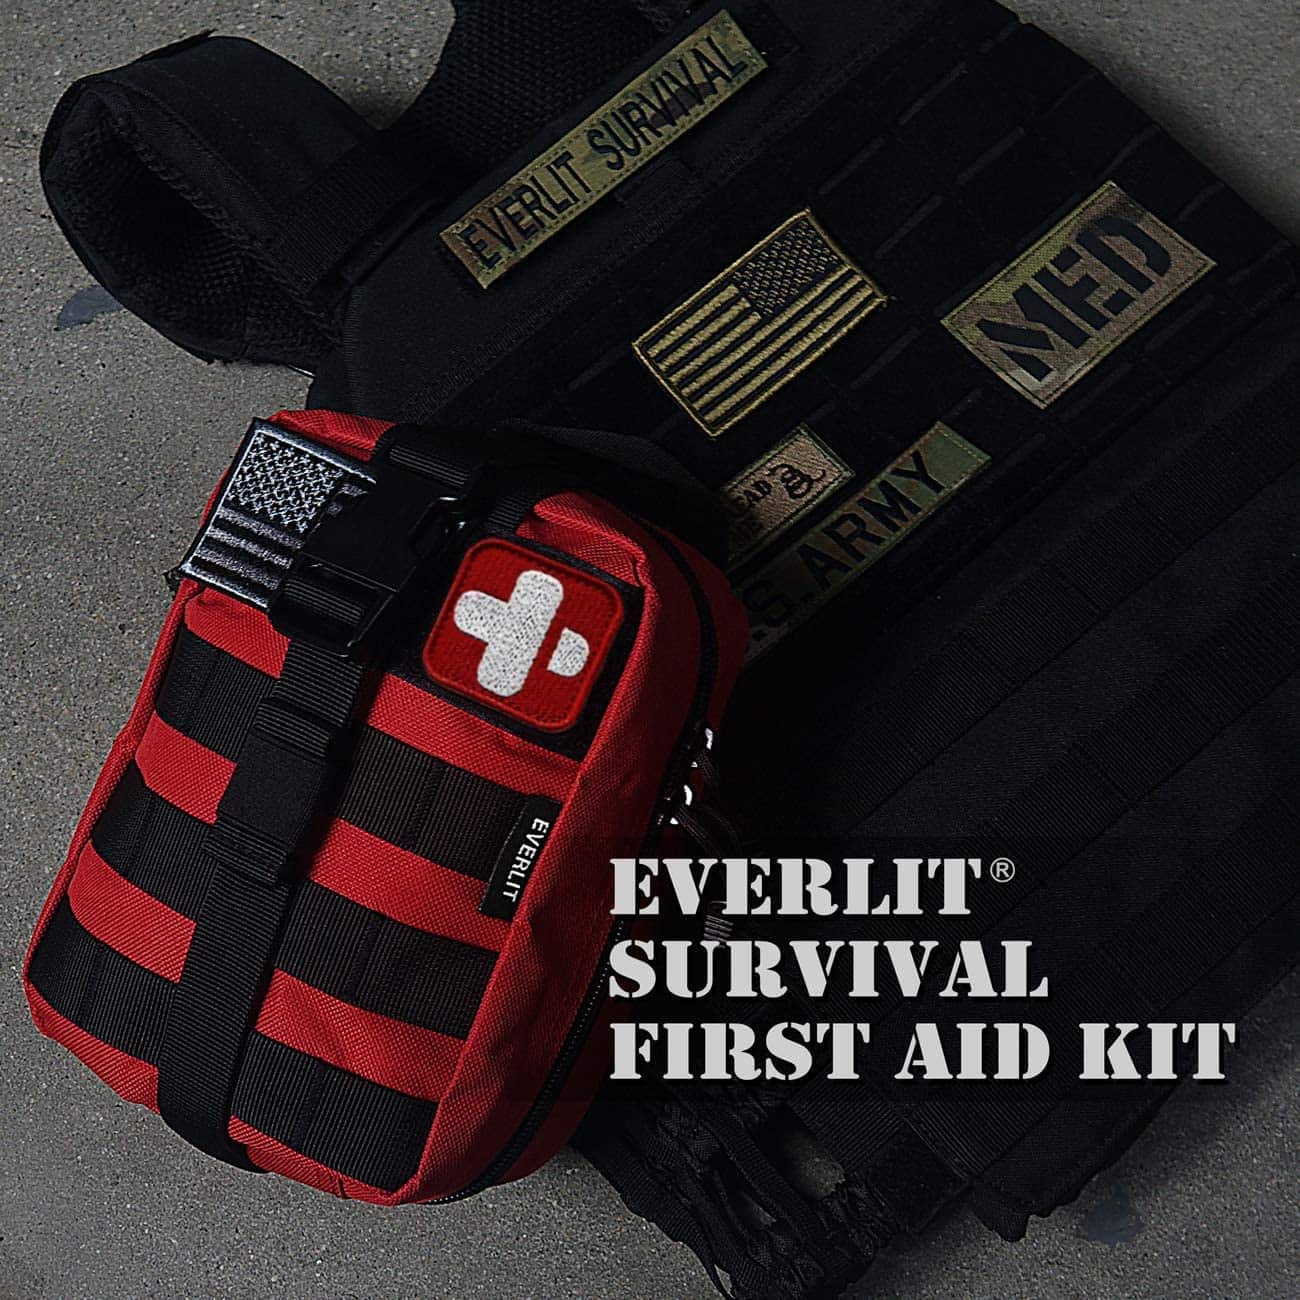 Red Survival First Aid Kit Contains Contains 250 Piece First Aid Kit - 12